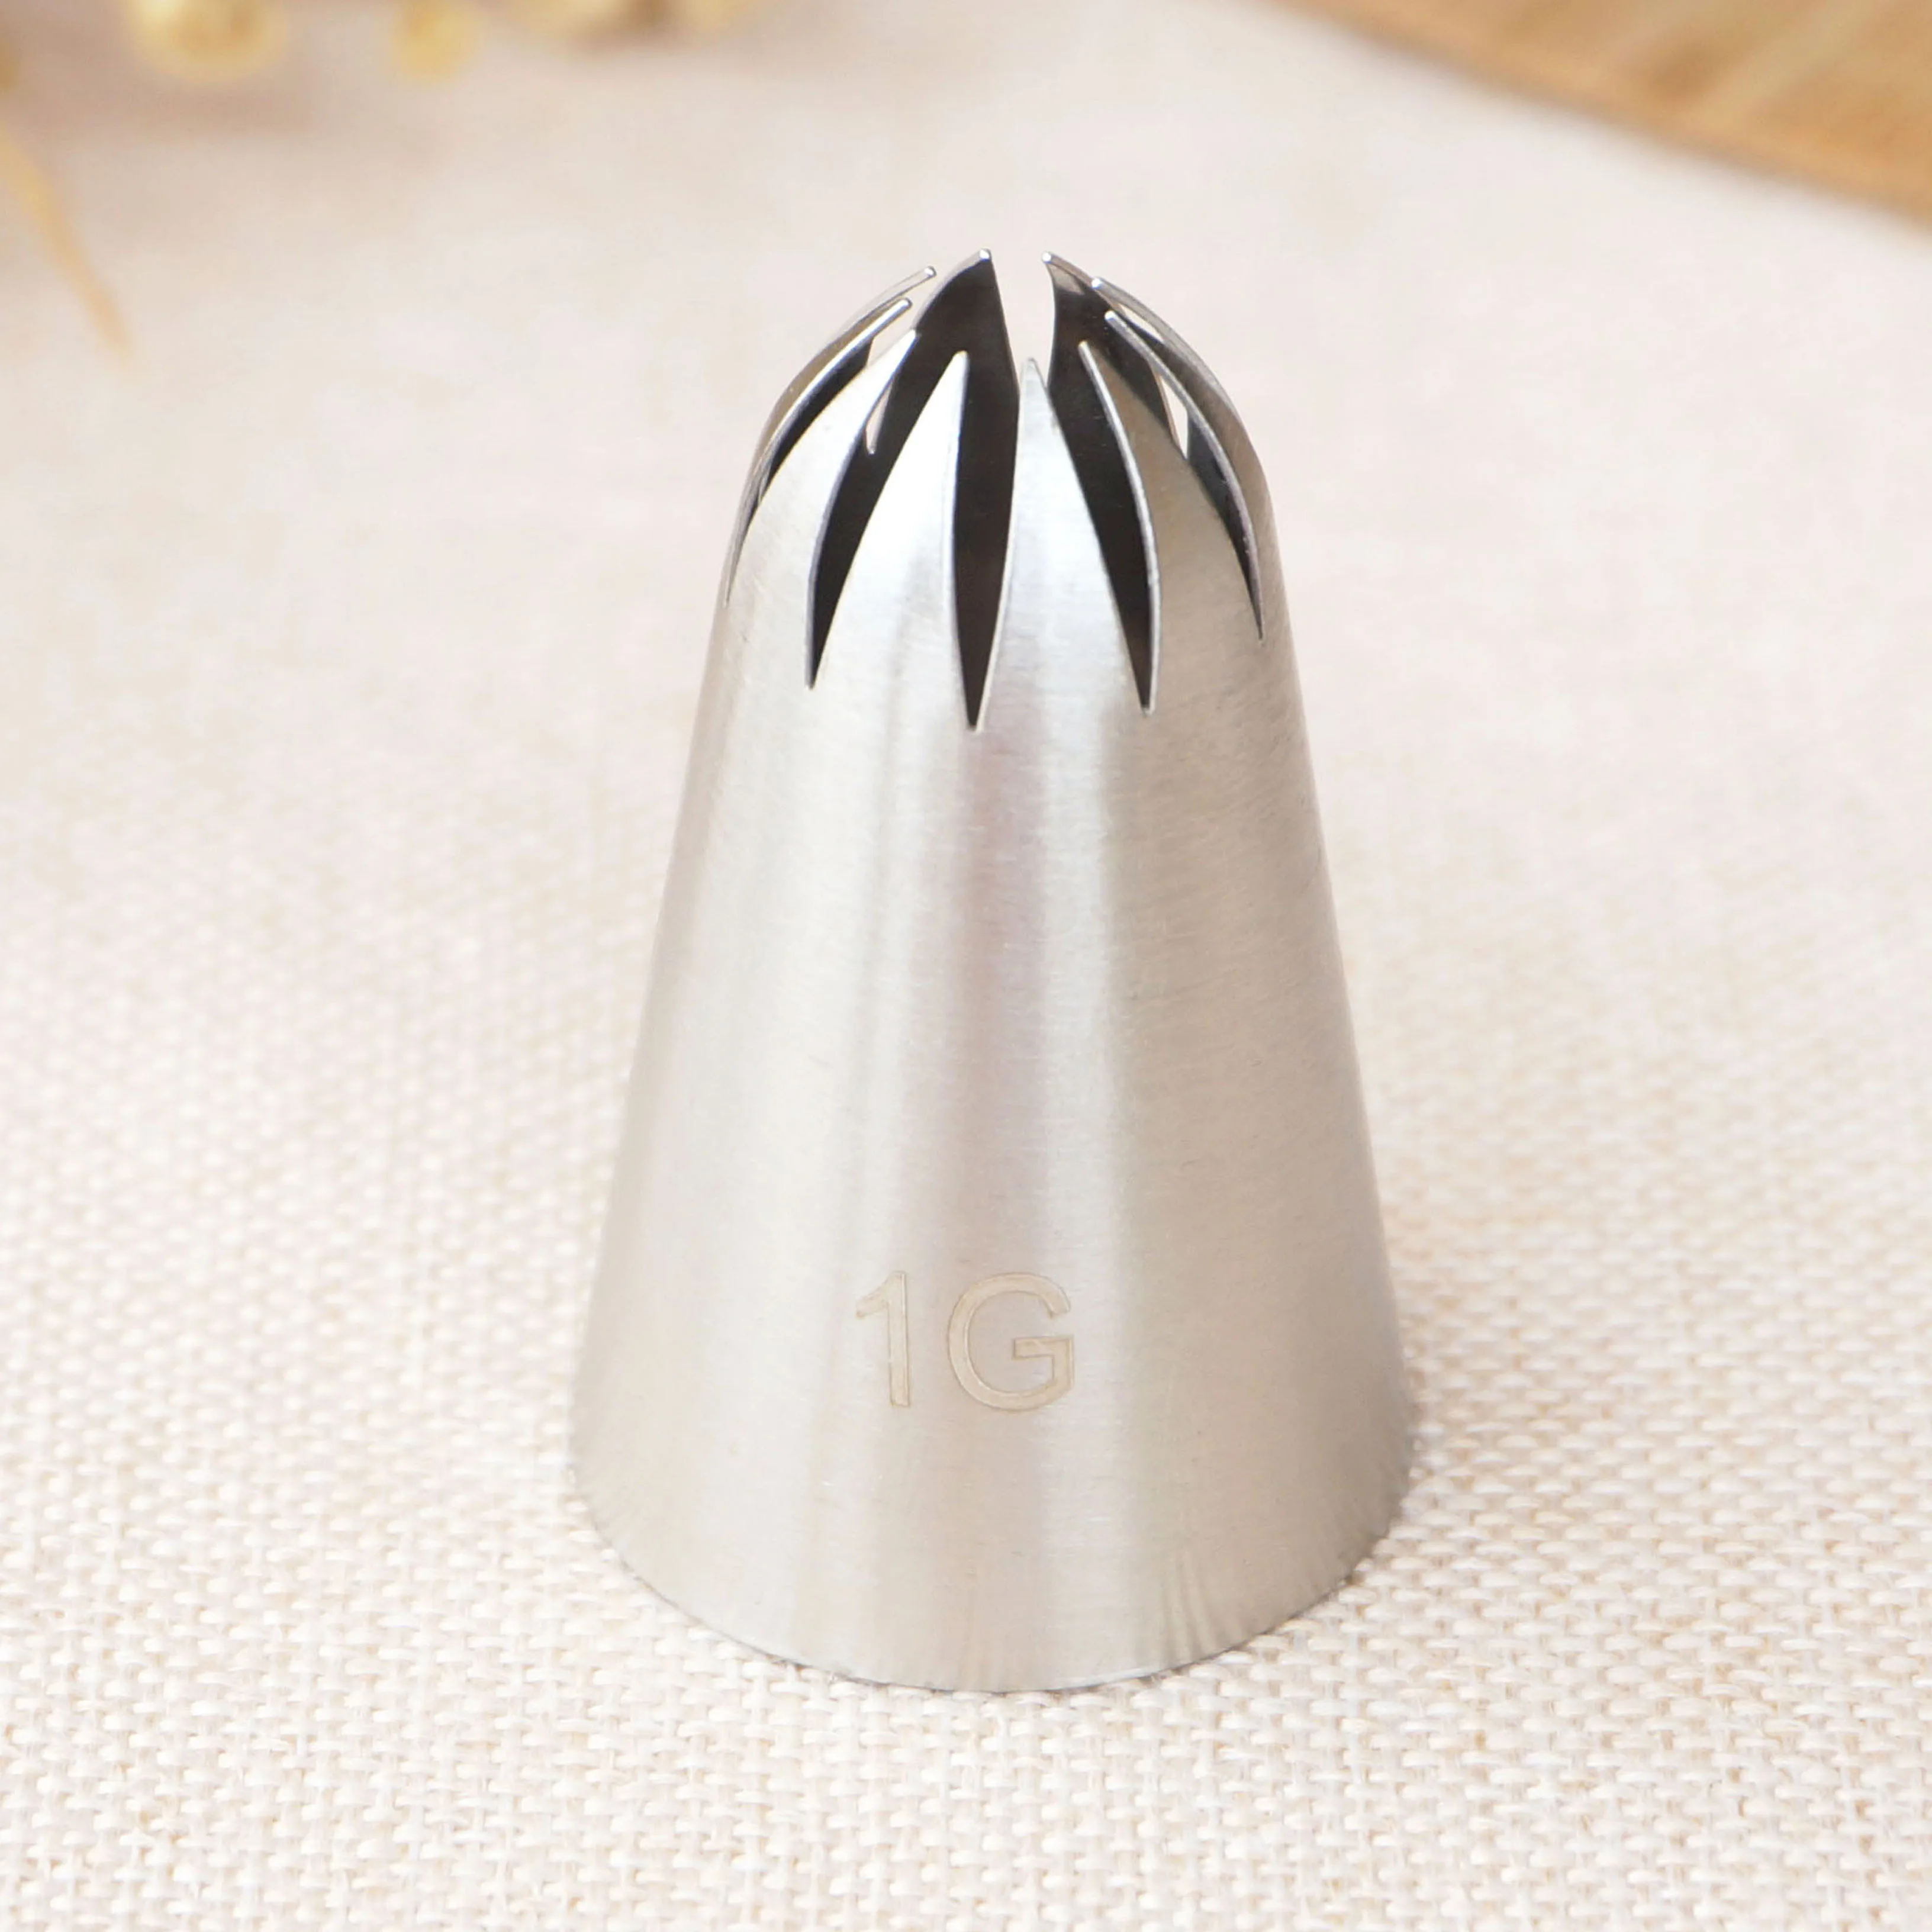 

#1G Large Size Cake Cream Piping Nozzles Decoration Stainless Steel Icing Tips Cupcake Pastry Tools